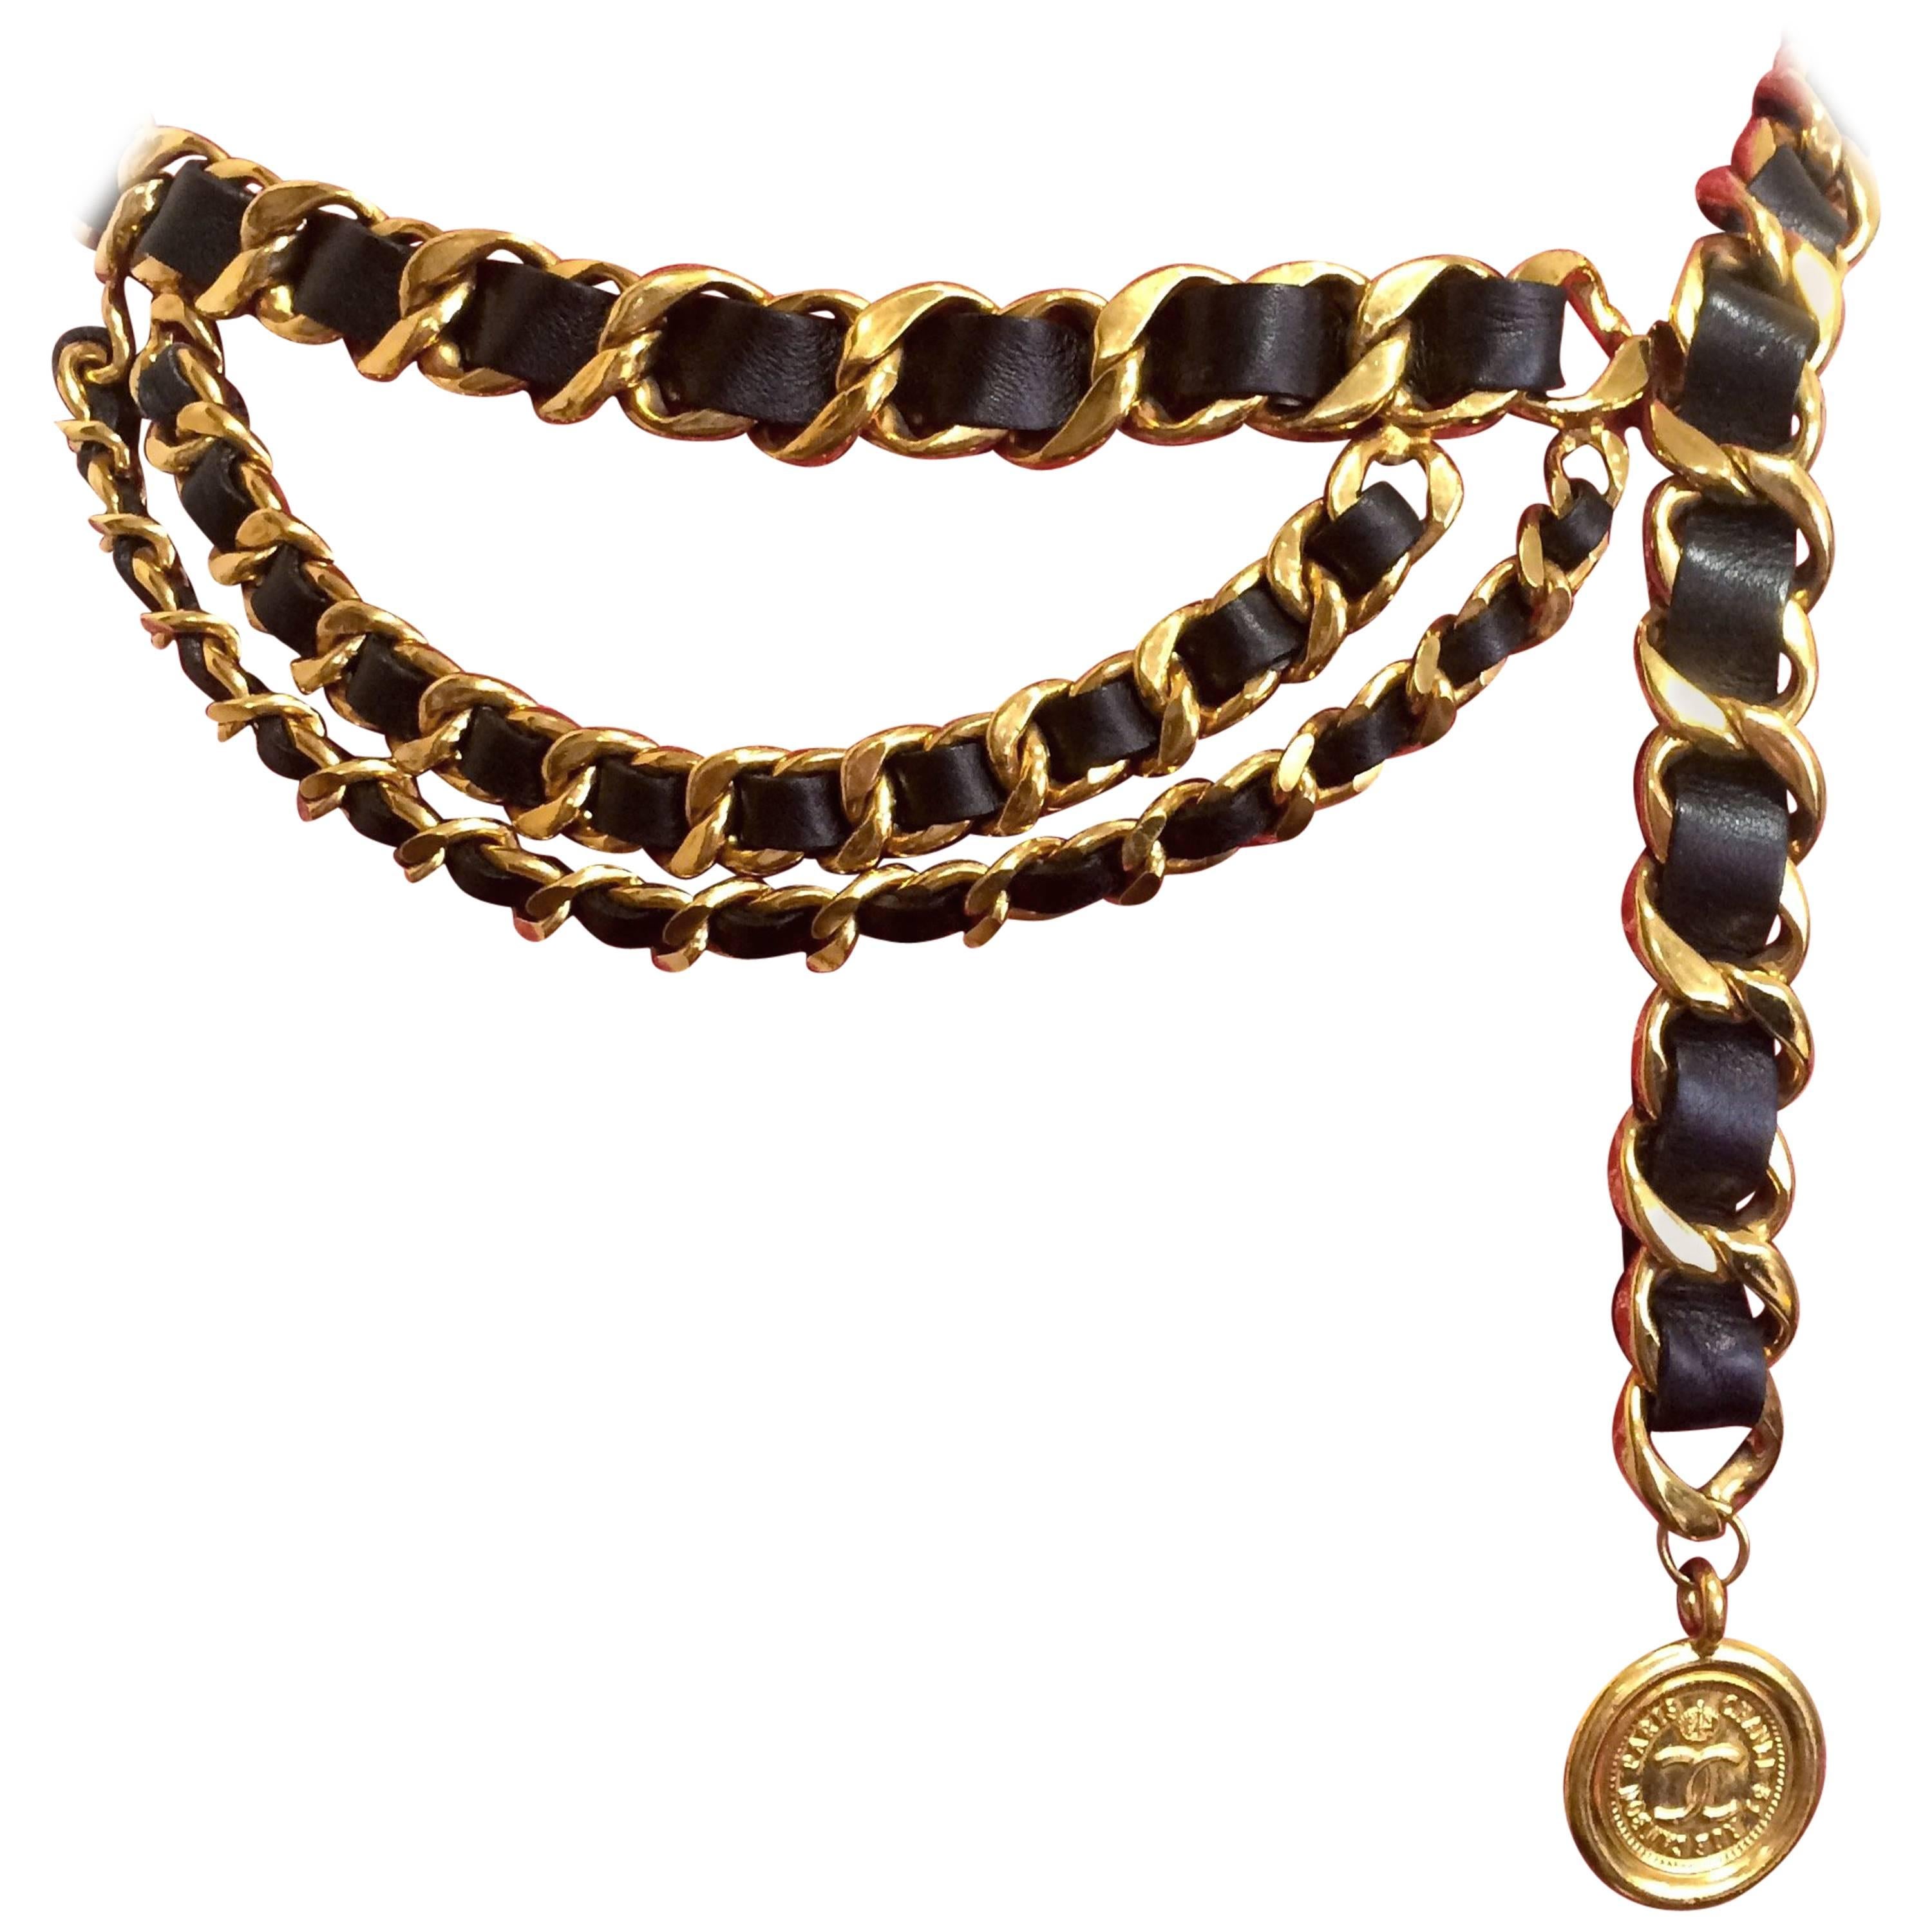 Vintage CHANEL black leather golden chain belt with CC and